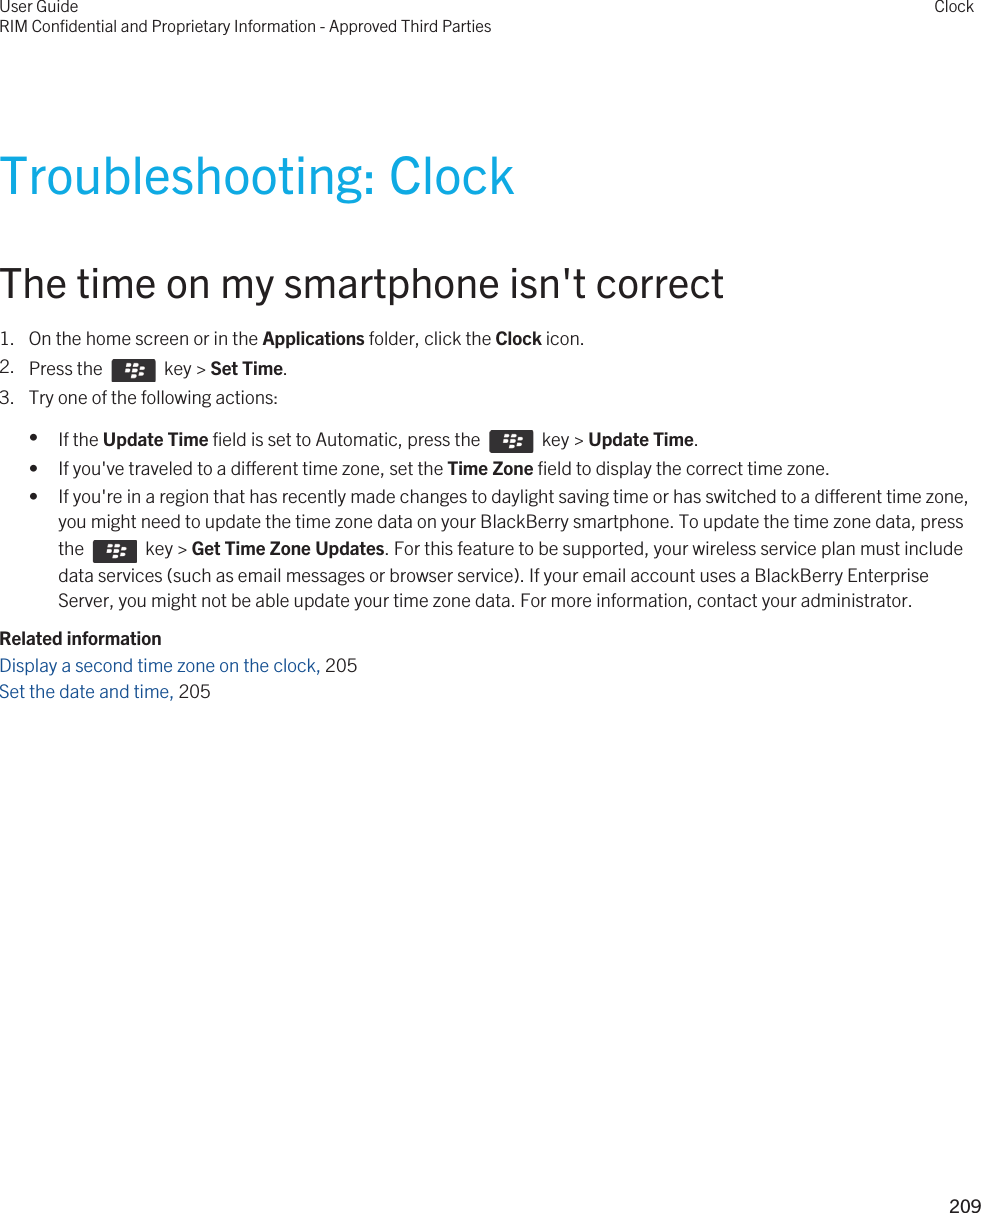 Troubleshooting: ClockThe time on my smartphone isn&apos;t correct1. On the home screen or in the Applications folder, click the Clock icon.2. Press the    key &gt; Set Time.3. Try one of the following actions:•If the Update Time field is set to Automatic, press the    key &gt; Update Time.• If you&apos;ve traveled to a different time zone, set the Time Zone field to display the correct time zone.• If you&apos;re in a region that has recently made changes to daylight saving time or has switched to a different time zone, you might need to update the time zone data on your BlackBerry smartphone. To update the time zone data, press the    key &gt; Get Time Zone Updates. For this feature to be supported, your wireless service plan must include data services (such as email messages or browser service). If your email account uses a BlackBerry Enterprise Server, you might not be able update your time zone data. For more information, contact your administrator.Related informationDisplay a second time zone on the clock, 205 Set the date and time, 205 User GuideRIM Confidential and Proprietary Information - Approved Third PartiesClock209 